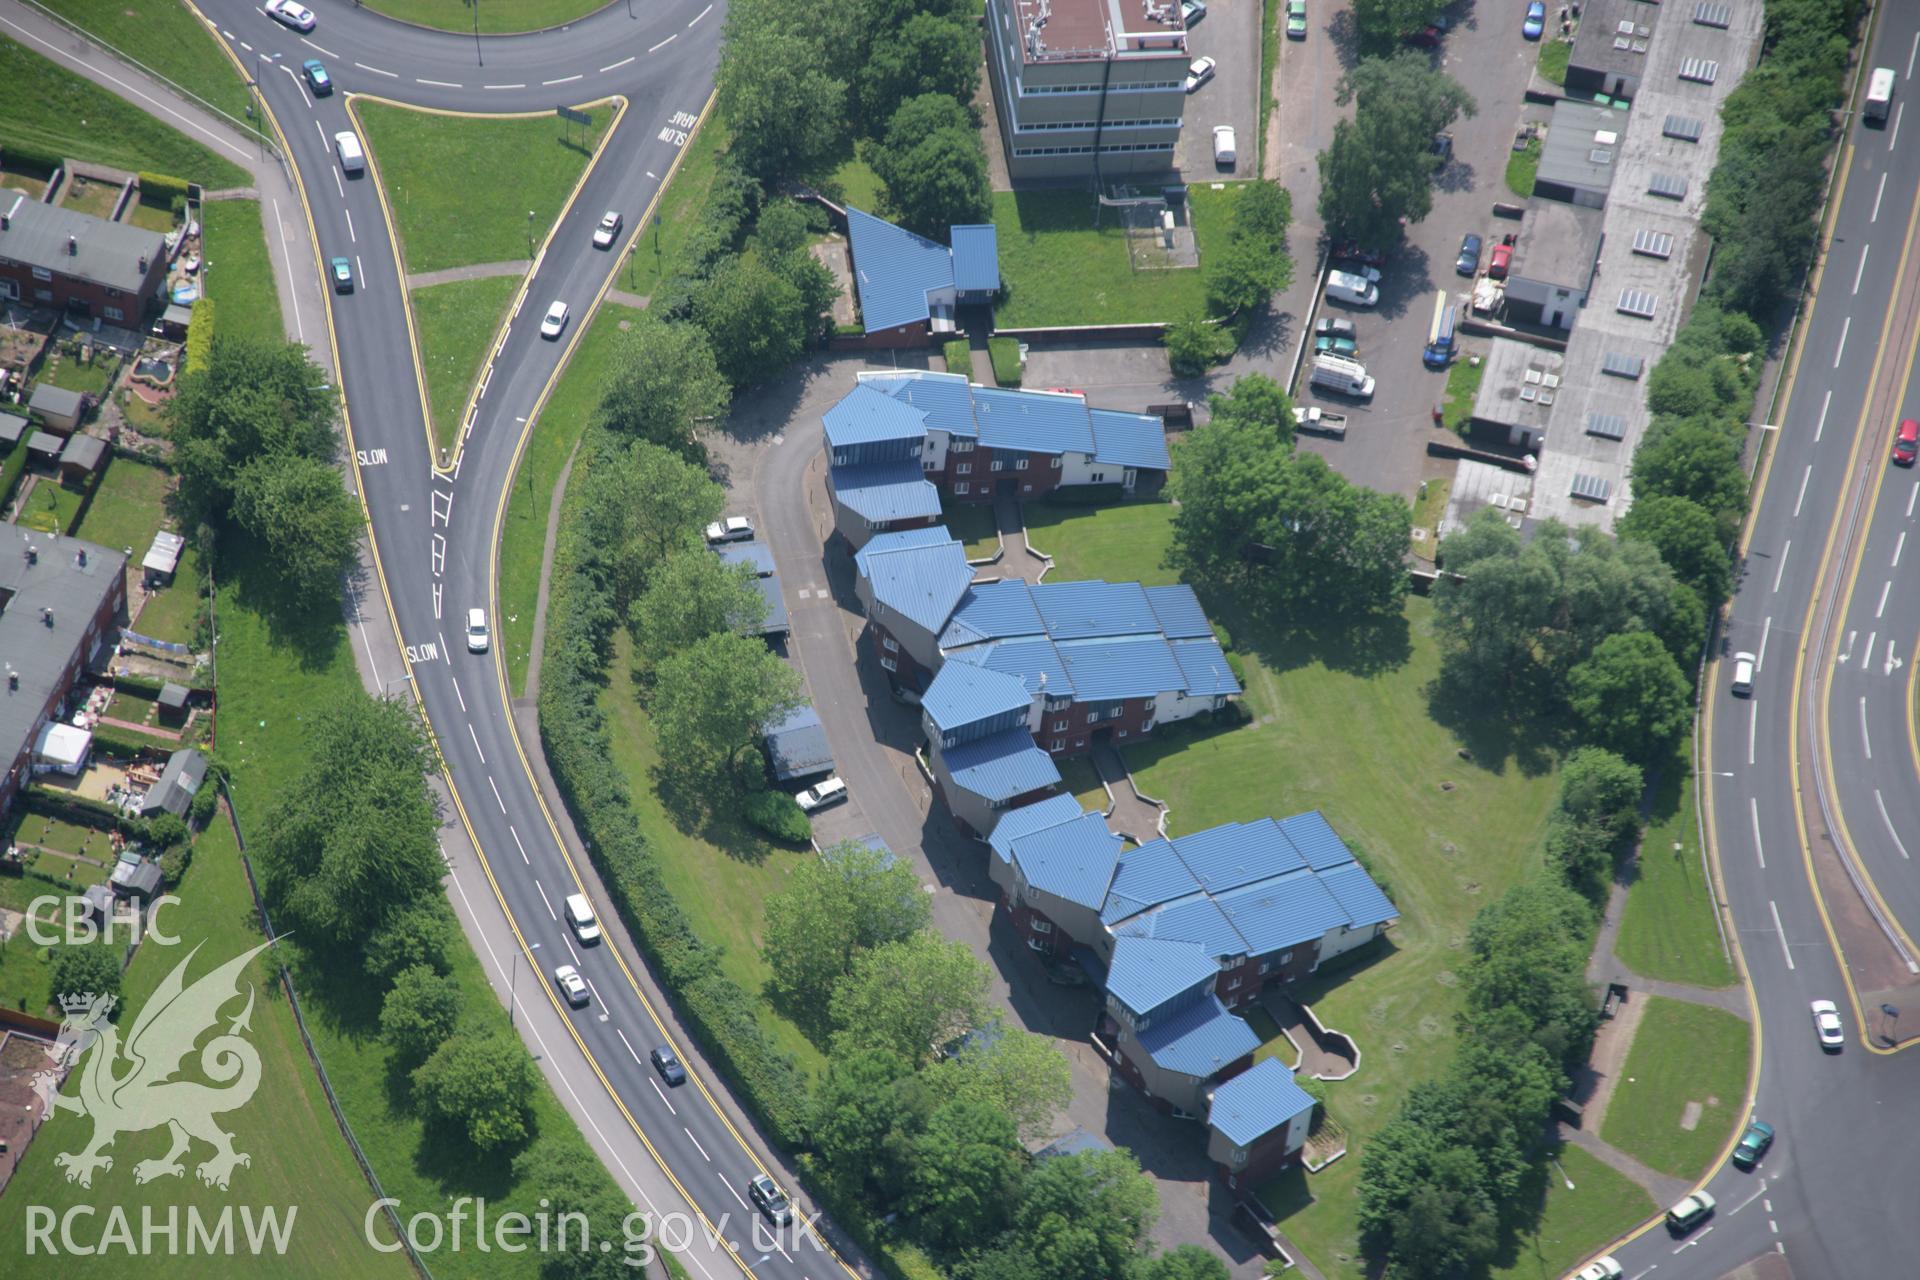 RCAHMW colour oblique aerial photograph of buildings in central Cwmbran from the north-east. Taken on 09 June 2006 by Toby Driver.